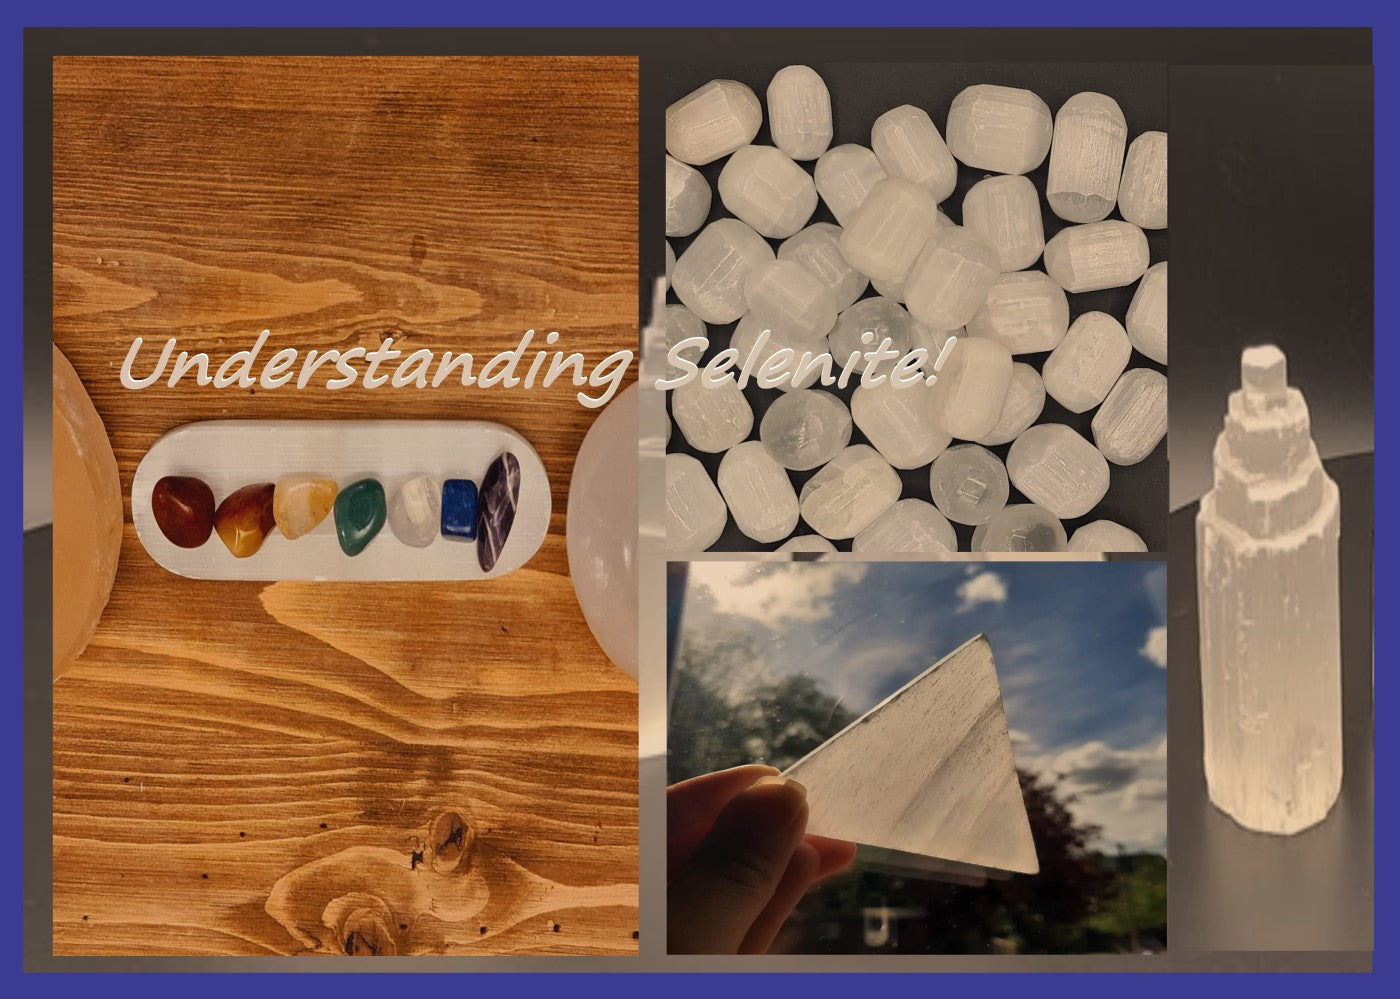 Cover Image for the Understanding Selenite Article